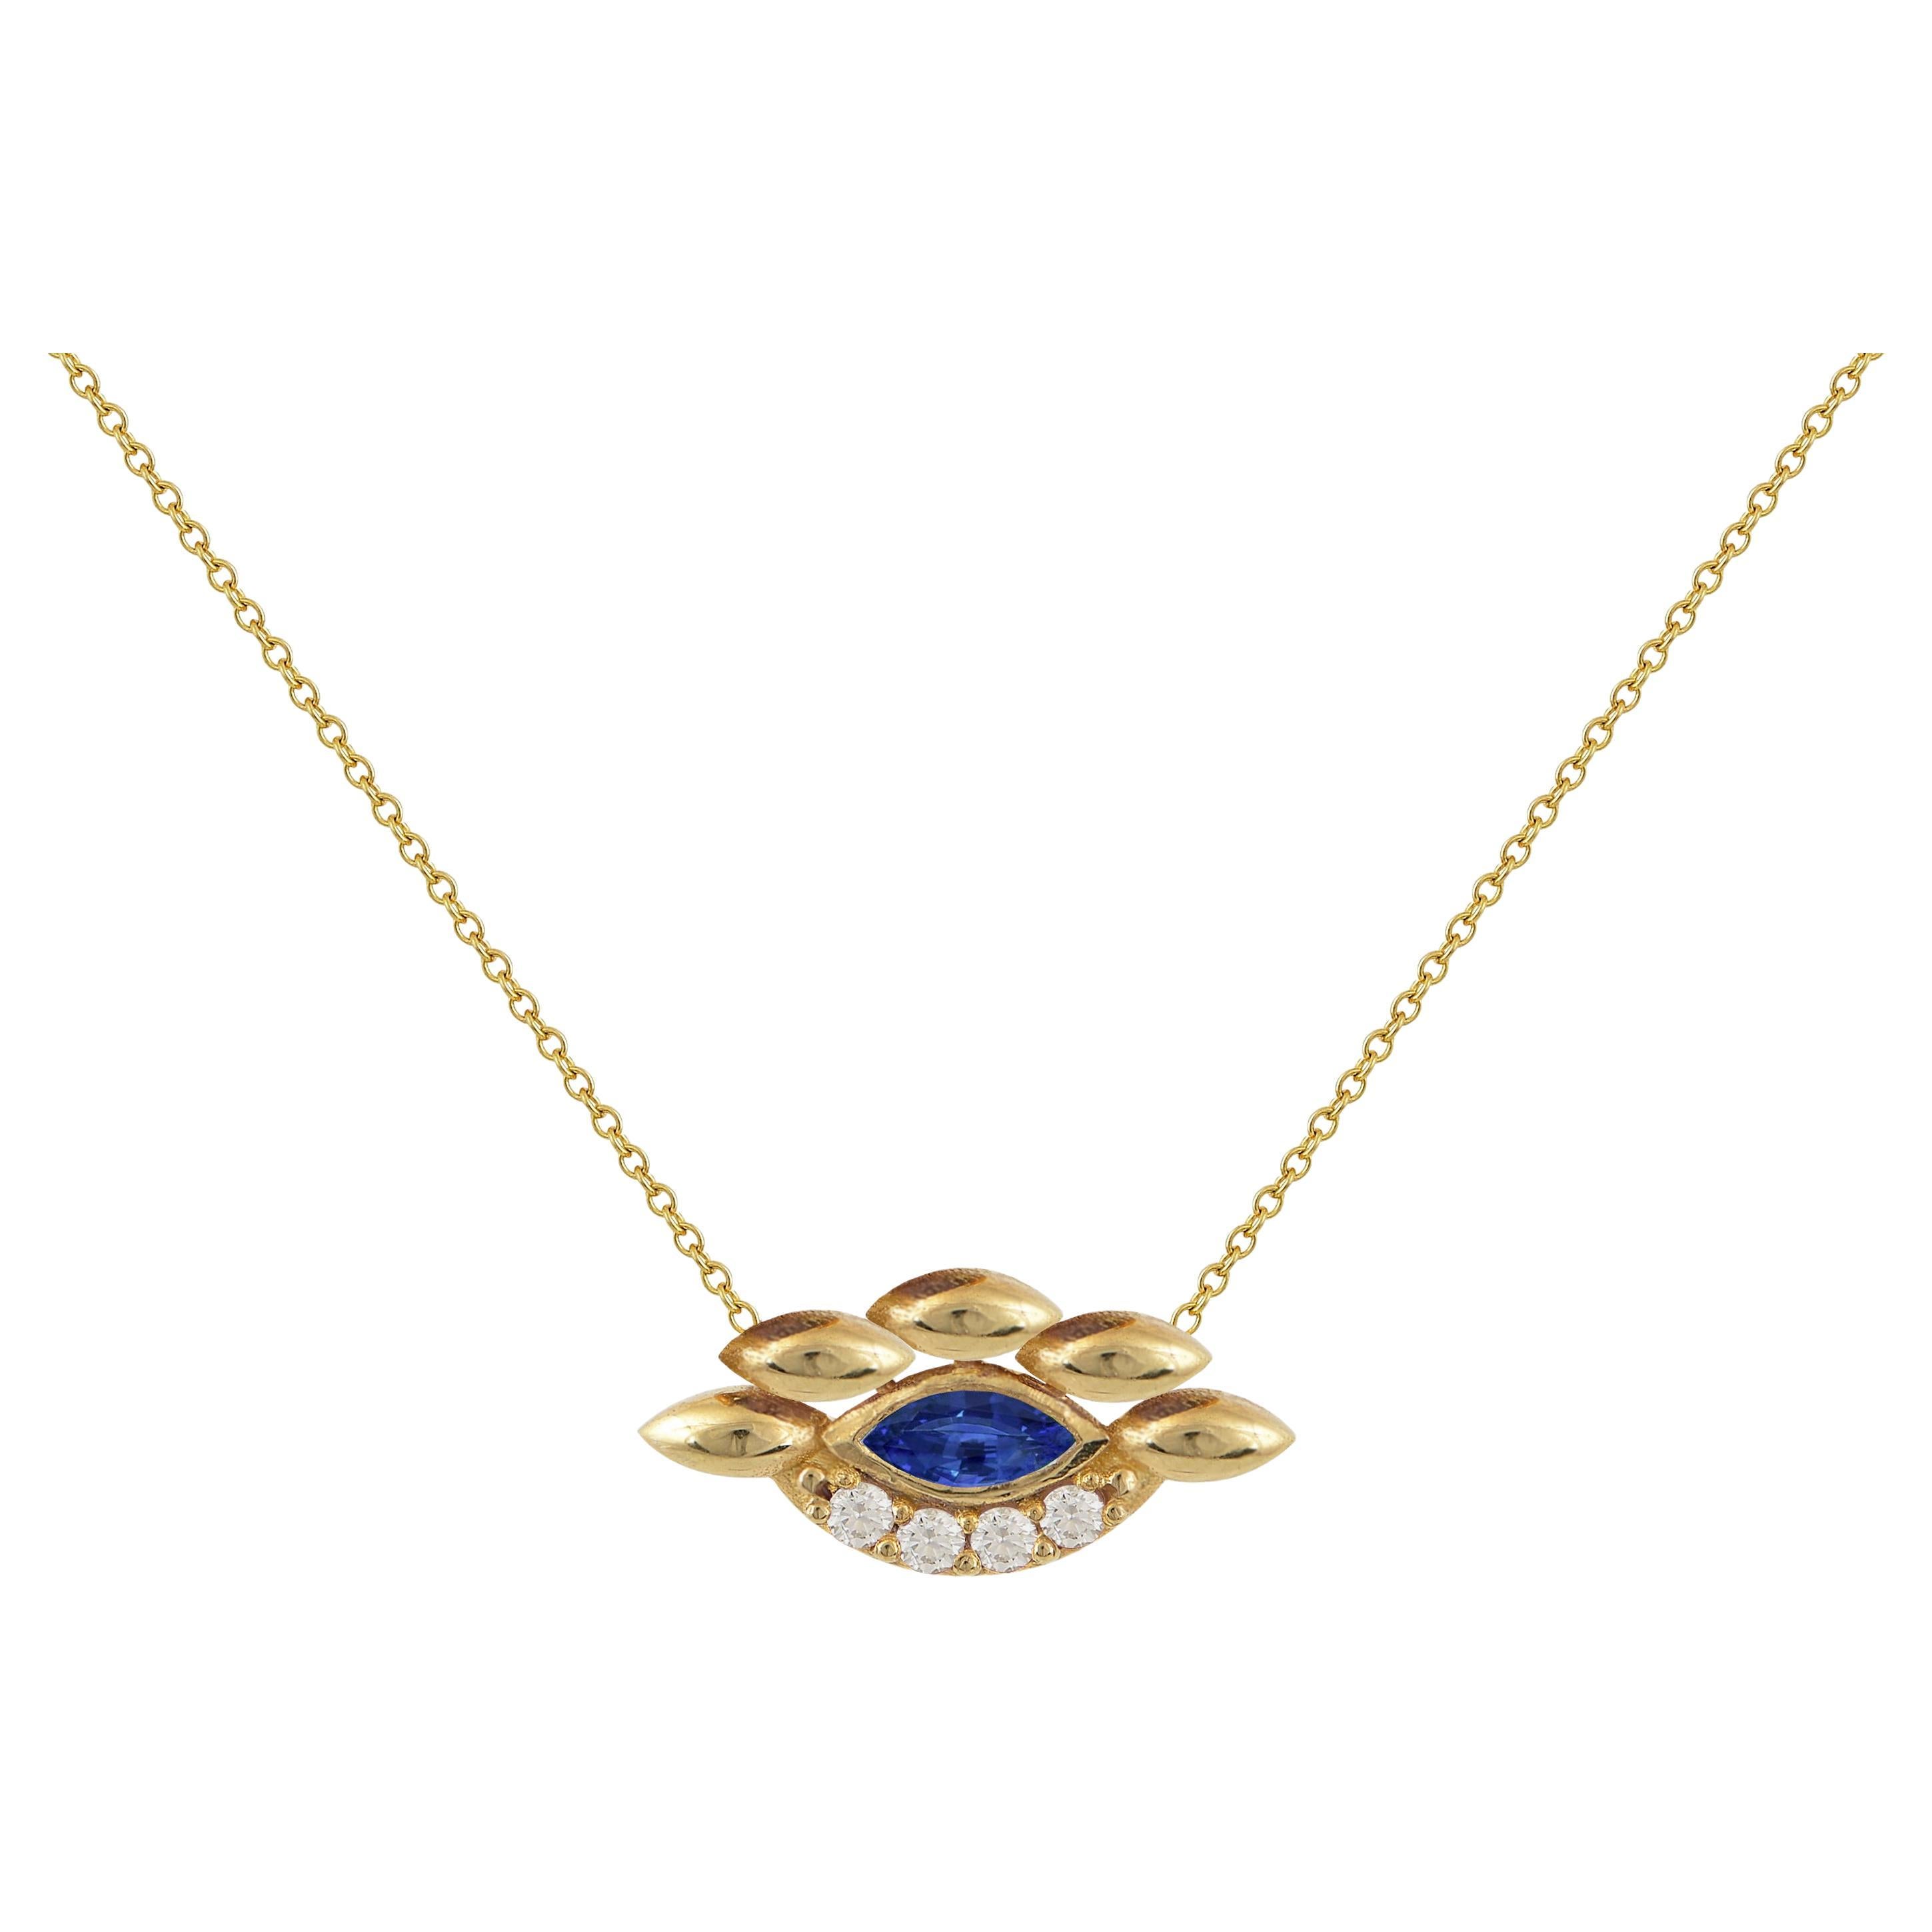 Eye Pendant in 18 Karat Yellow Gold With Diamonds And A Sapphire